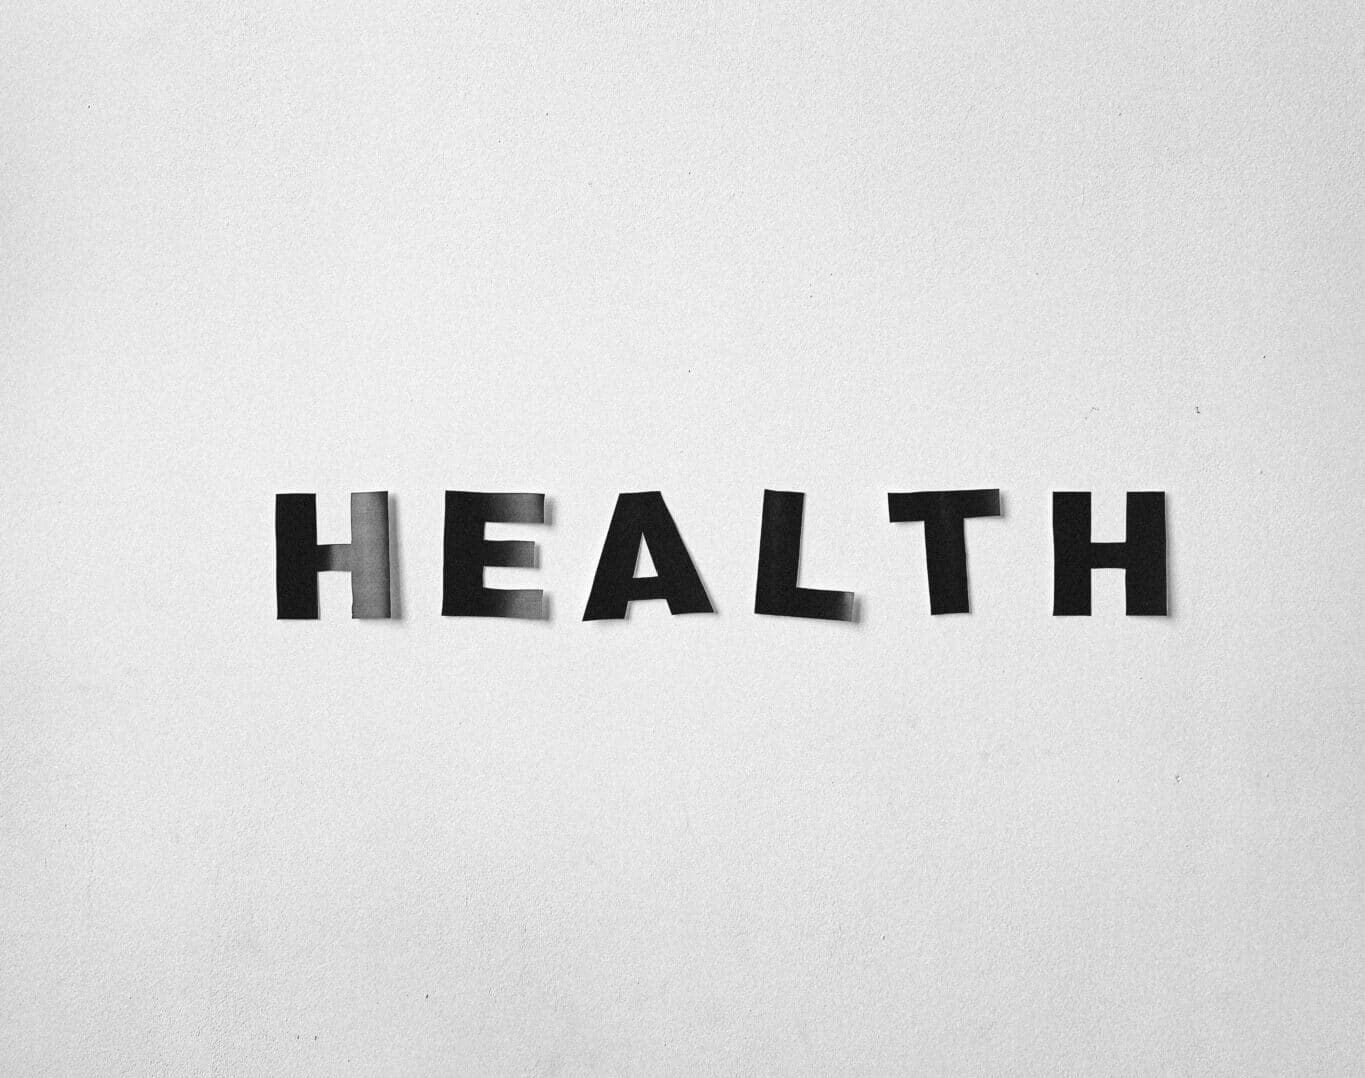 letters spelling HEALTH on white background